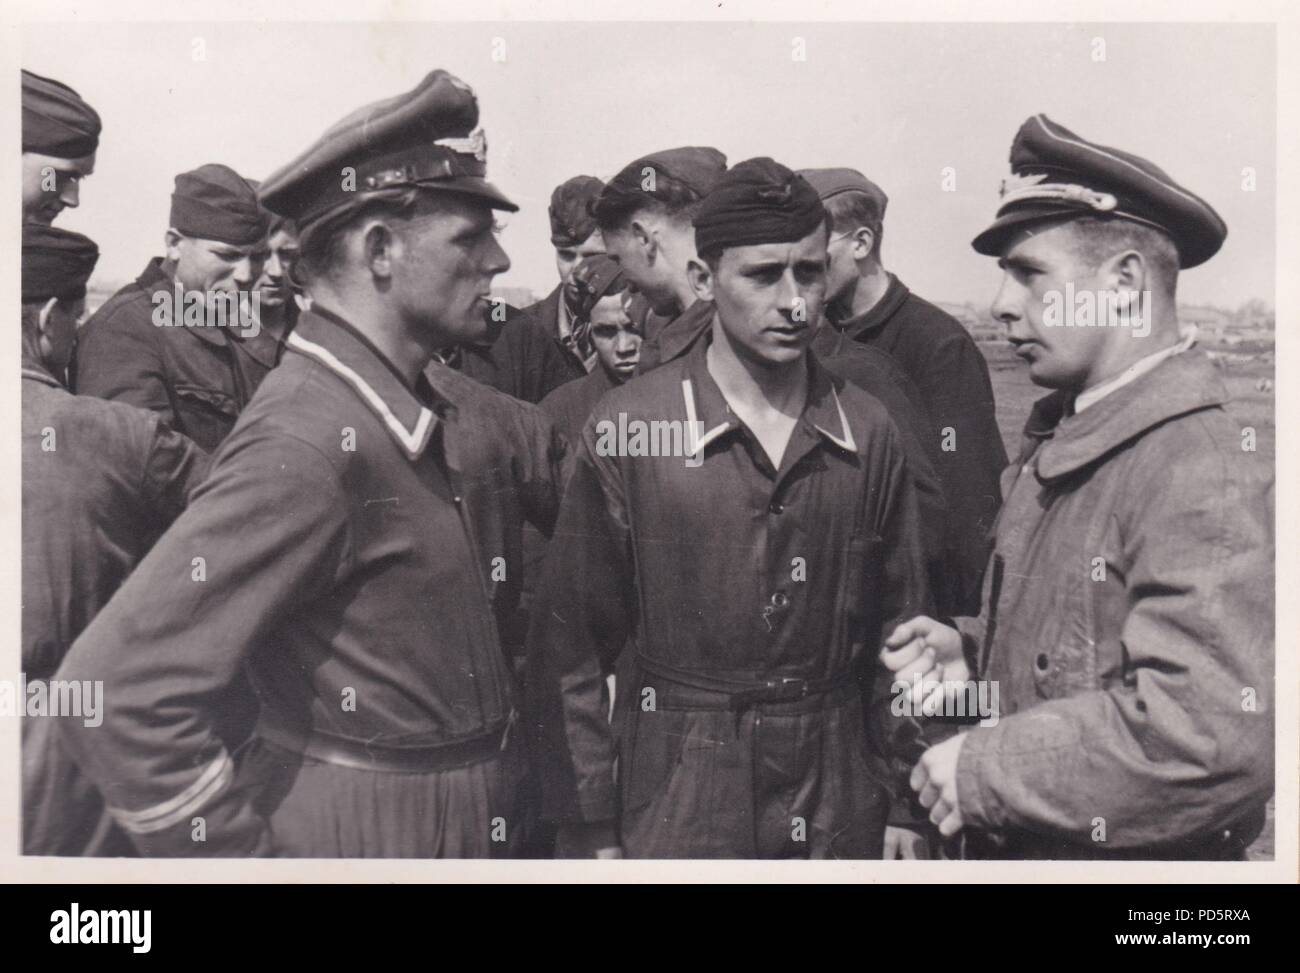 Image from the photo album of Oberleutnant Oscar Müller of  Kampfgeschwader 1: A Luftwaffe officer talks to members of the ground crew of 5. Staffel Kampfgescwader 1 'Hindenburg' at Dno Airfield in Russia, 1942. Stock Photo